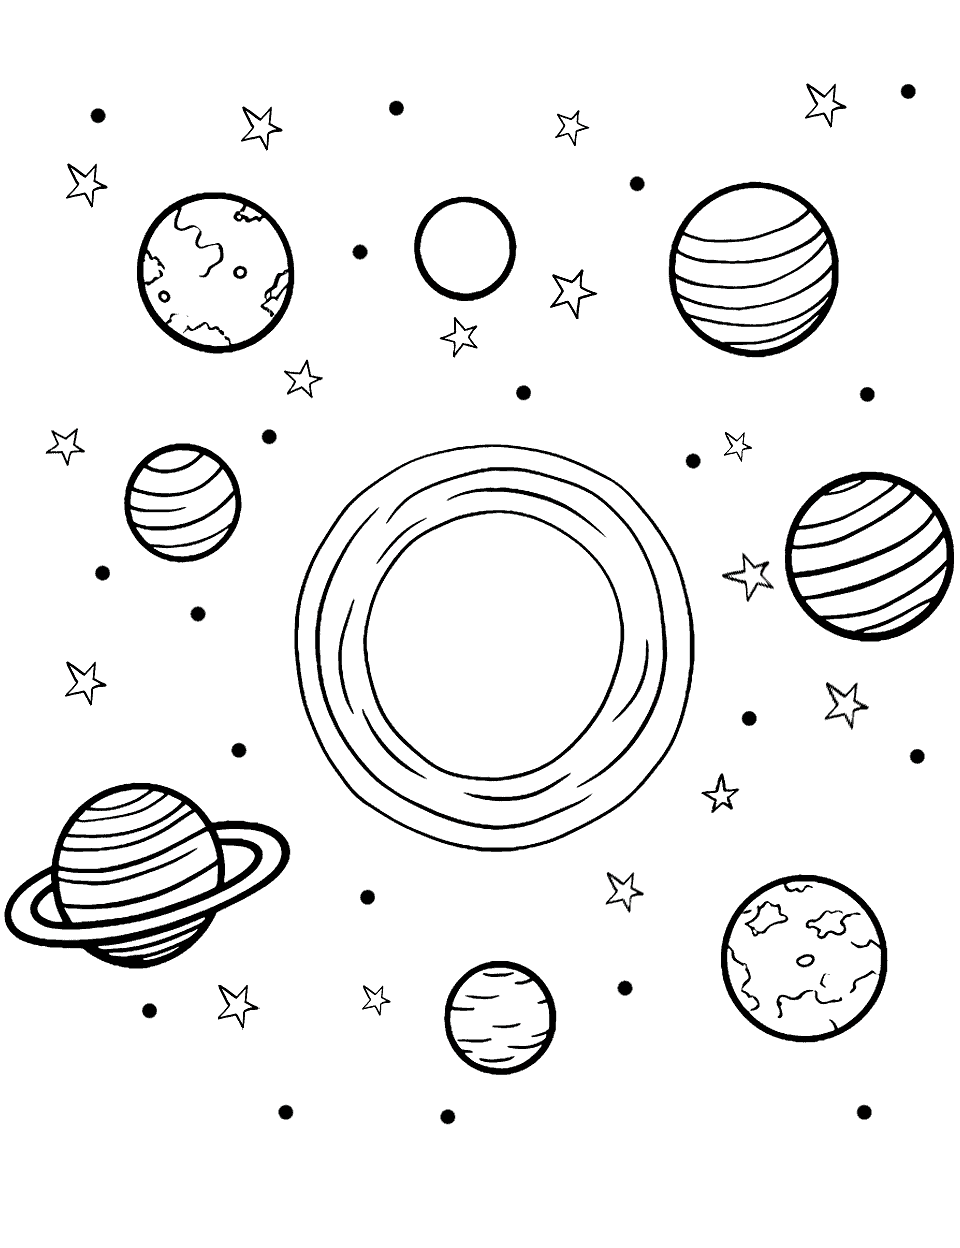 Simple Solar System Coloring Page - A basic layout of the solar system with sun and planets.